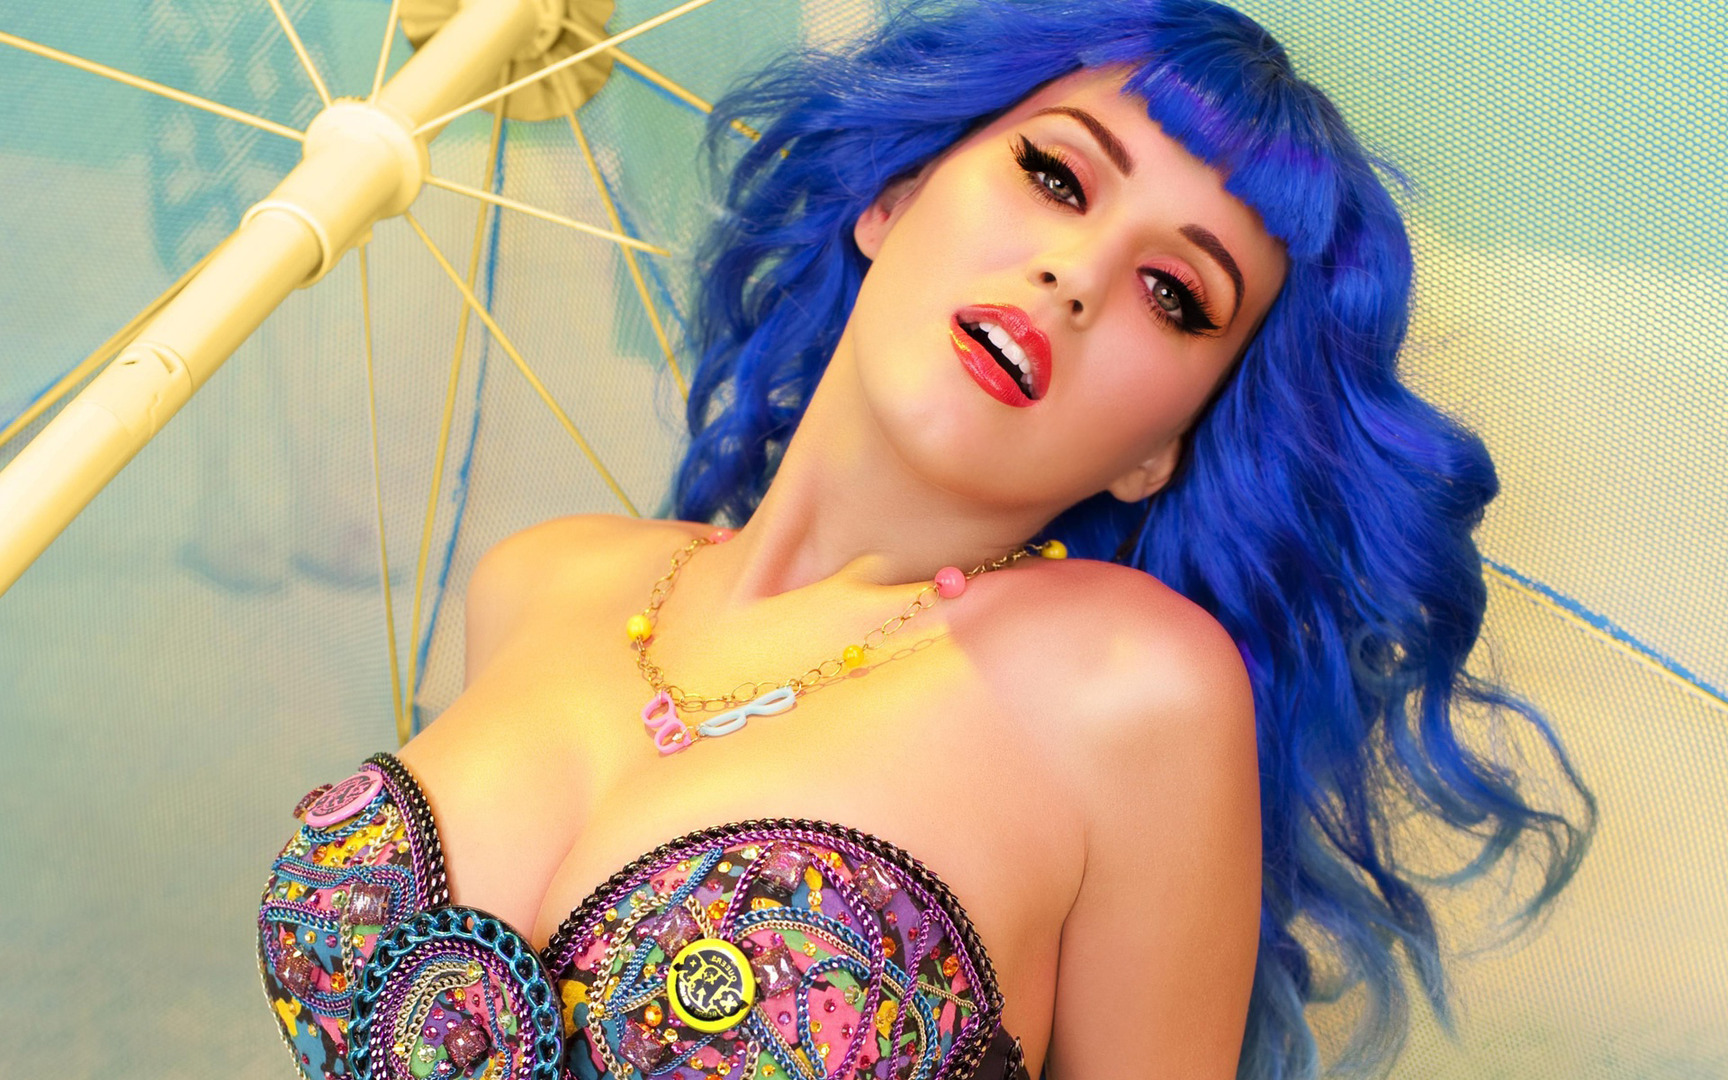 Hot Katy Perry Wallpaper High Definition High Quality Widescreen 6709